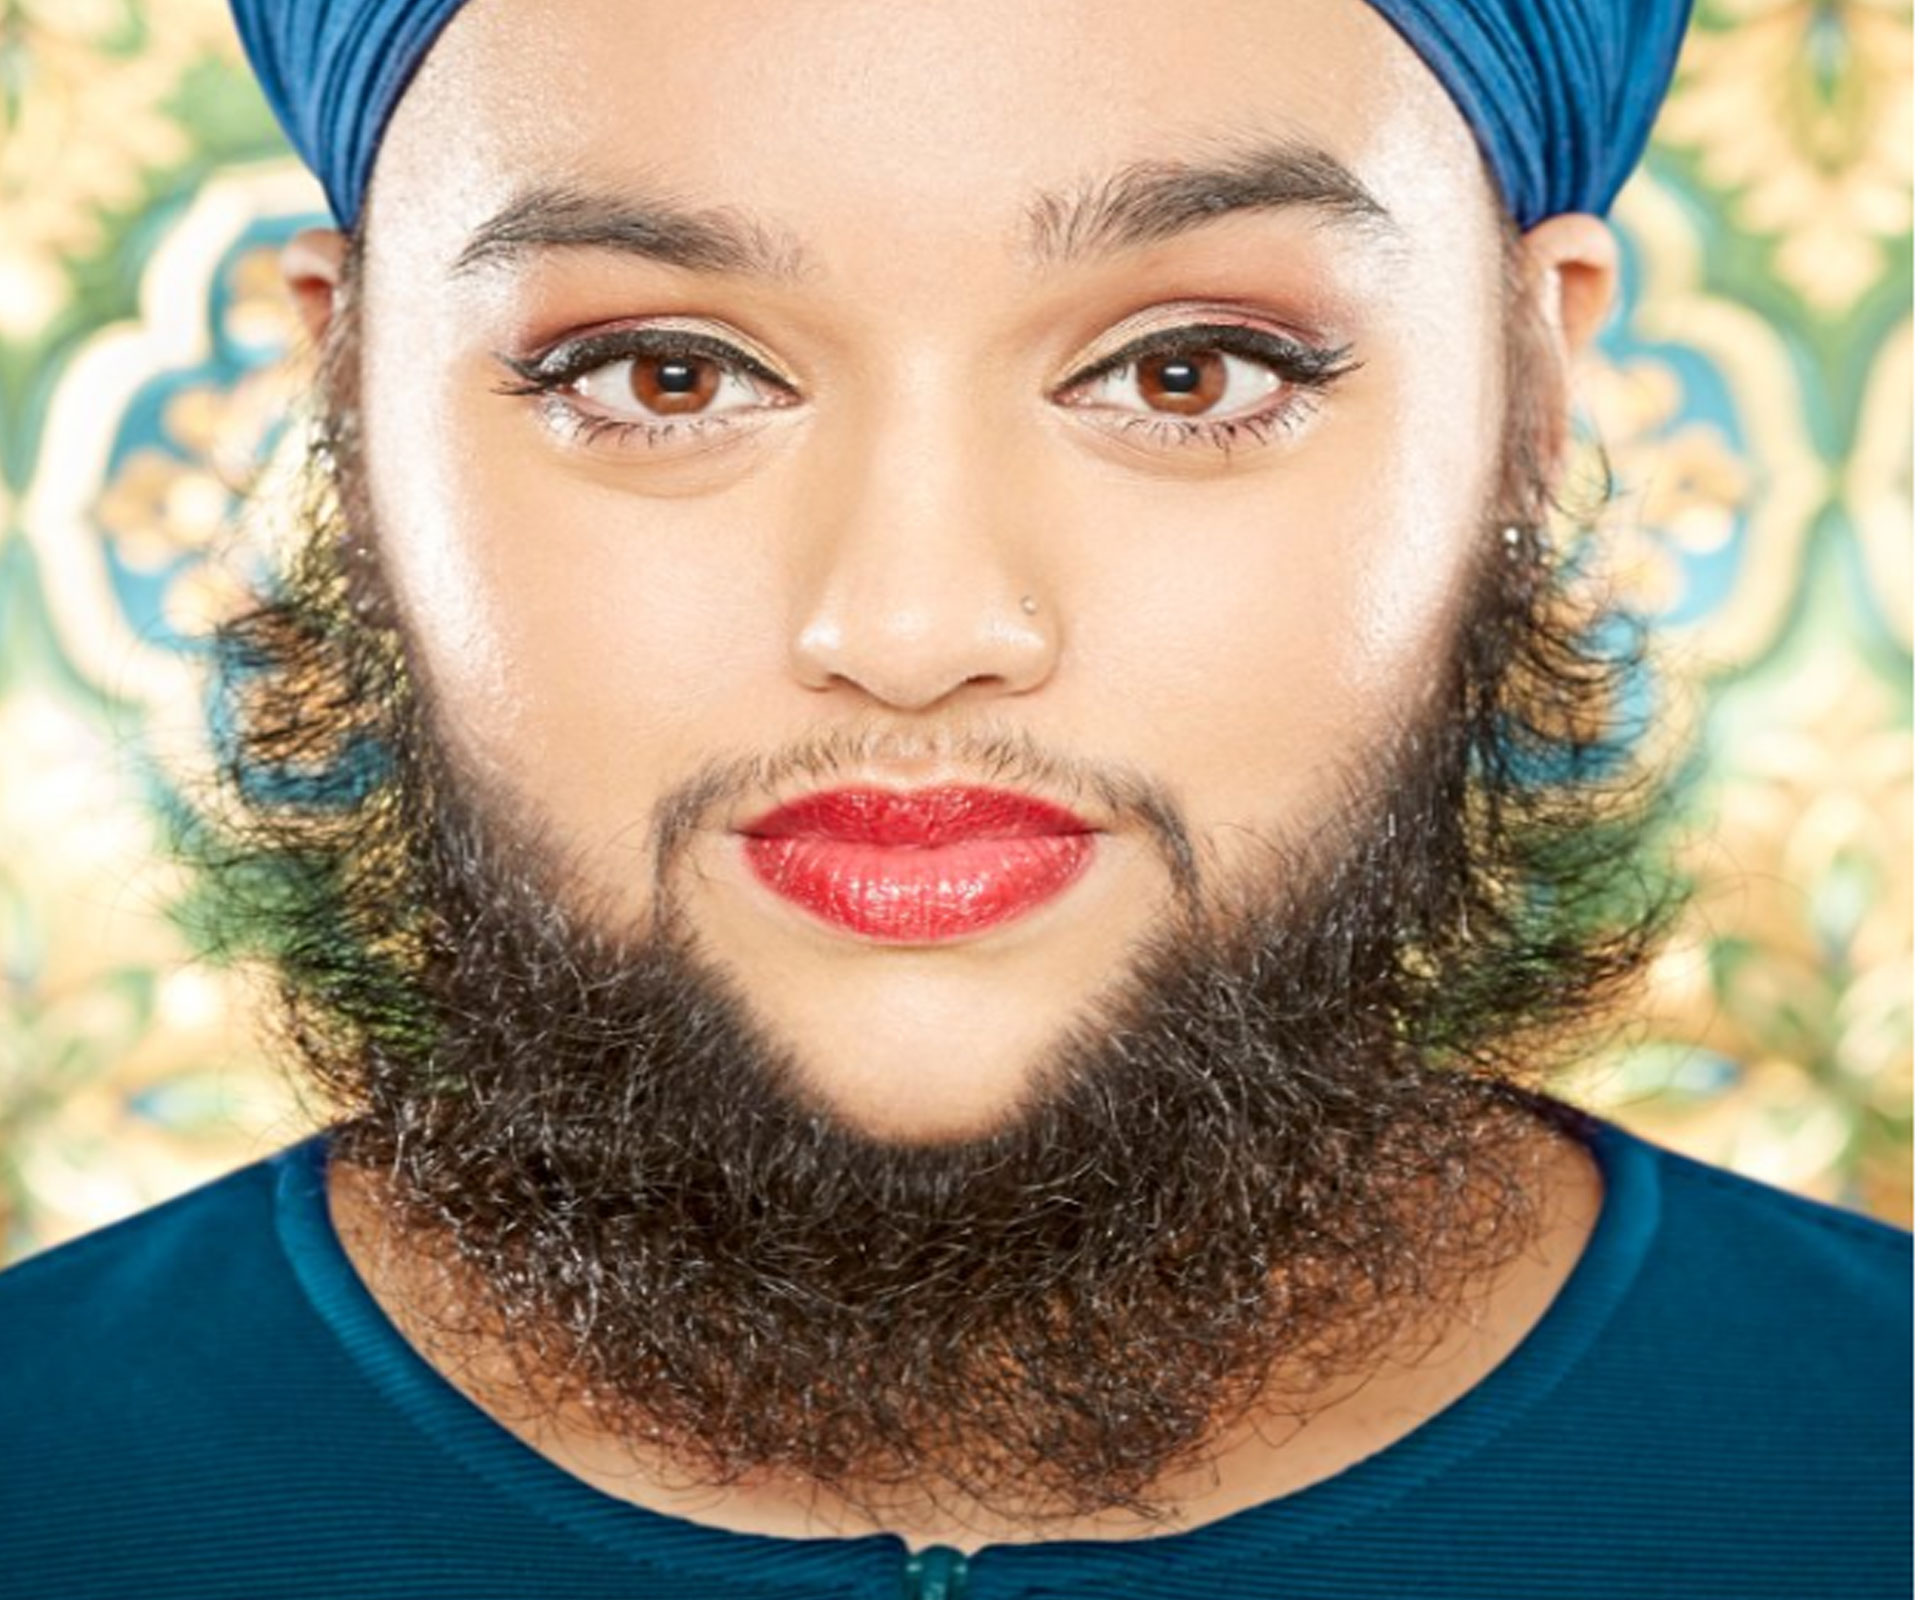 World record for youngest woman to grow a full beard